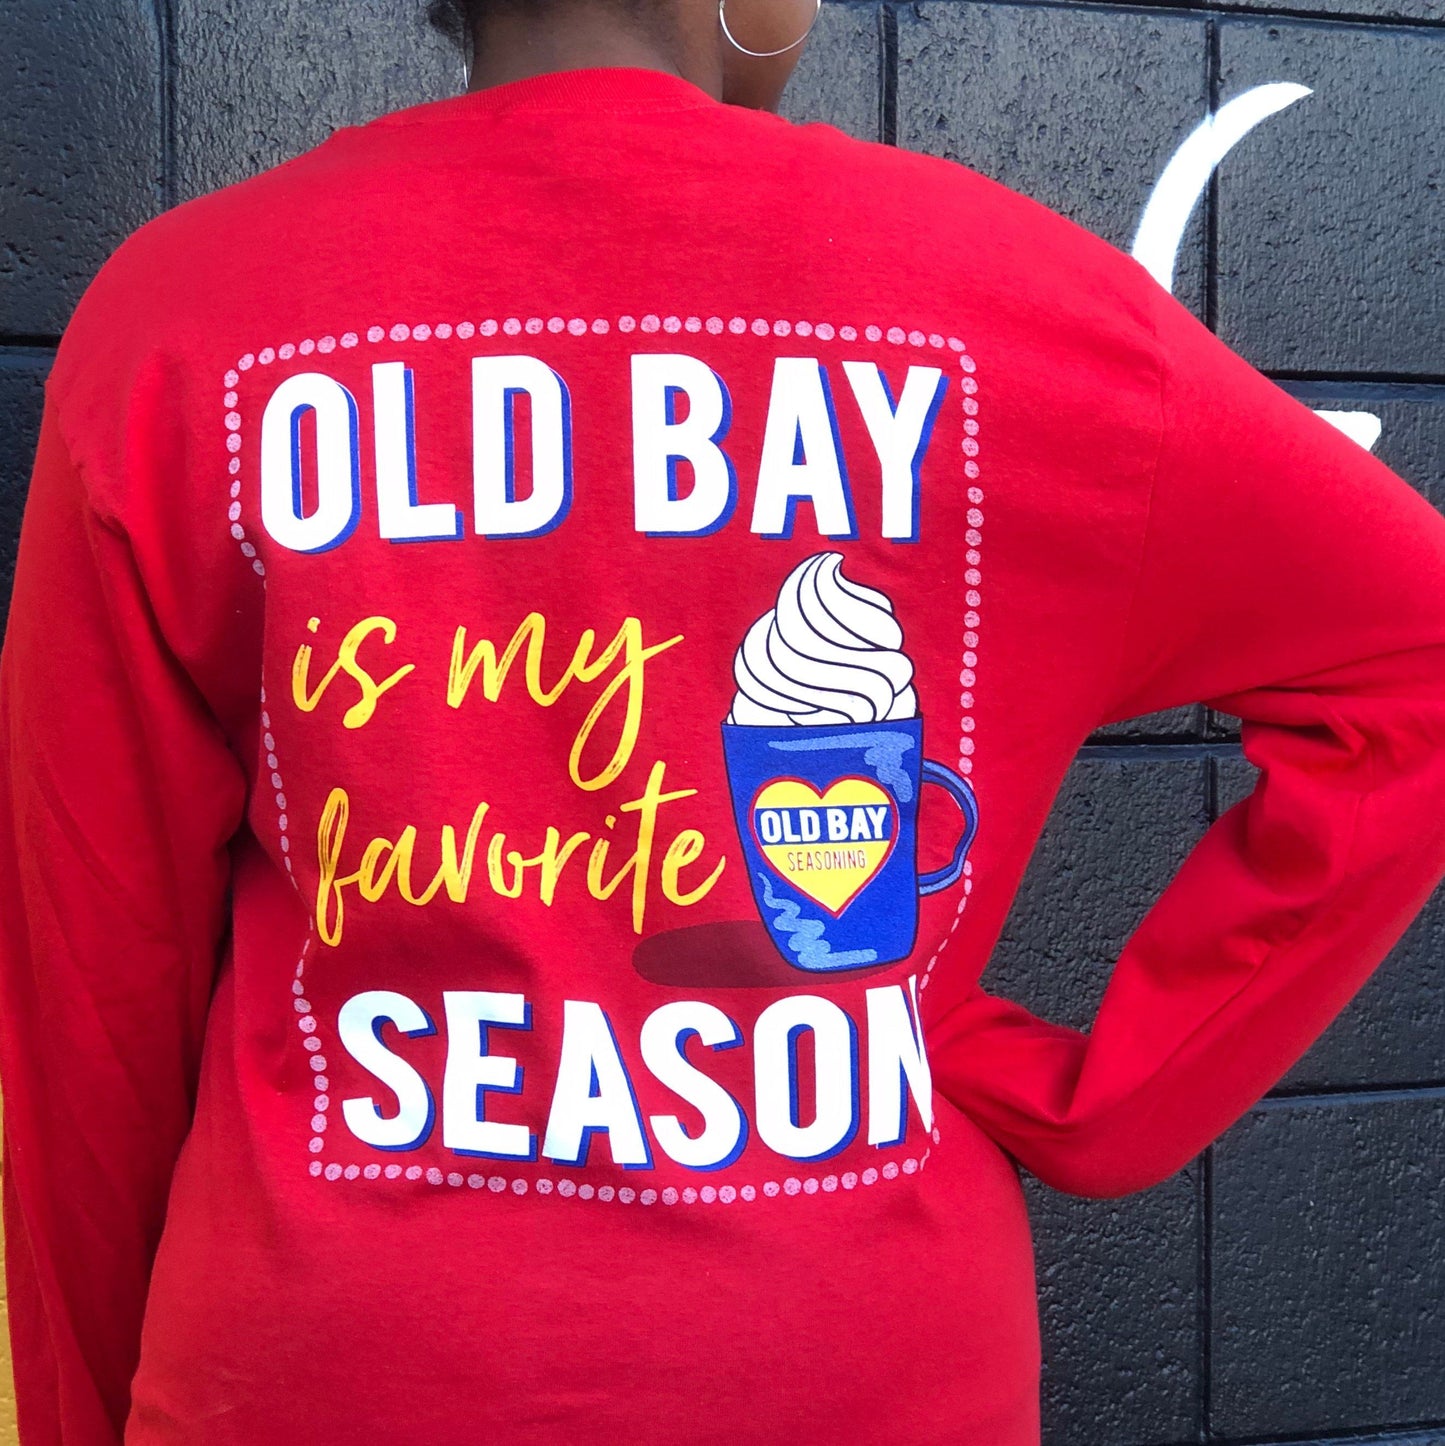 Old Bay Is My Favorite Season (Red) / Long Sleeve Shirt - Route One Apparel